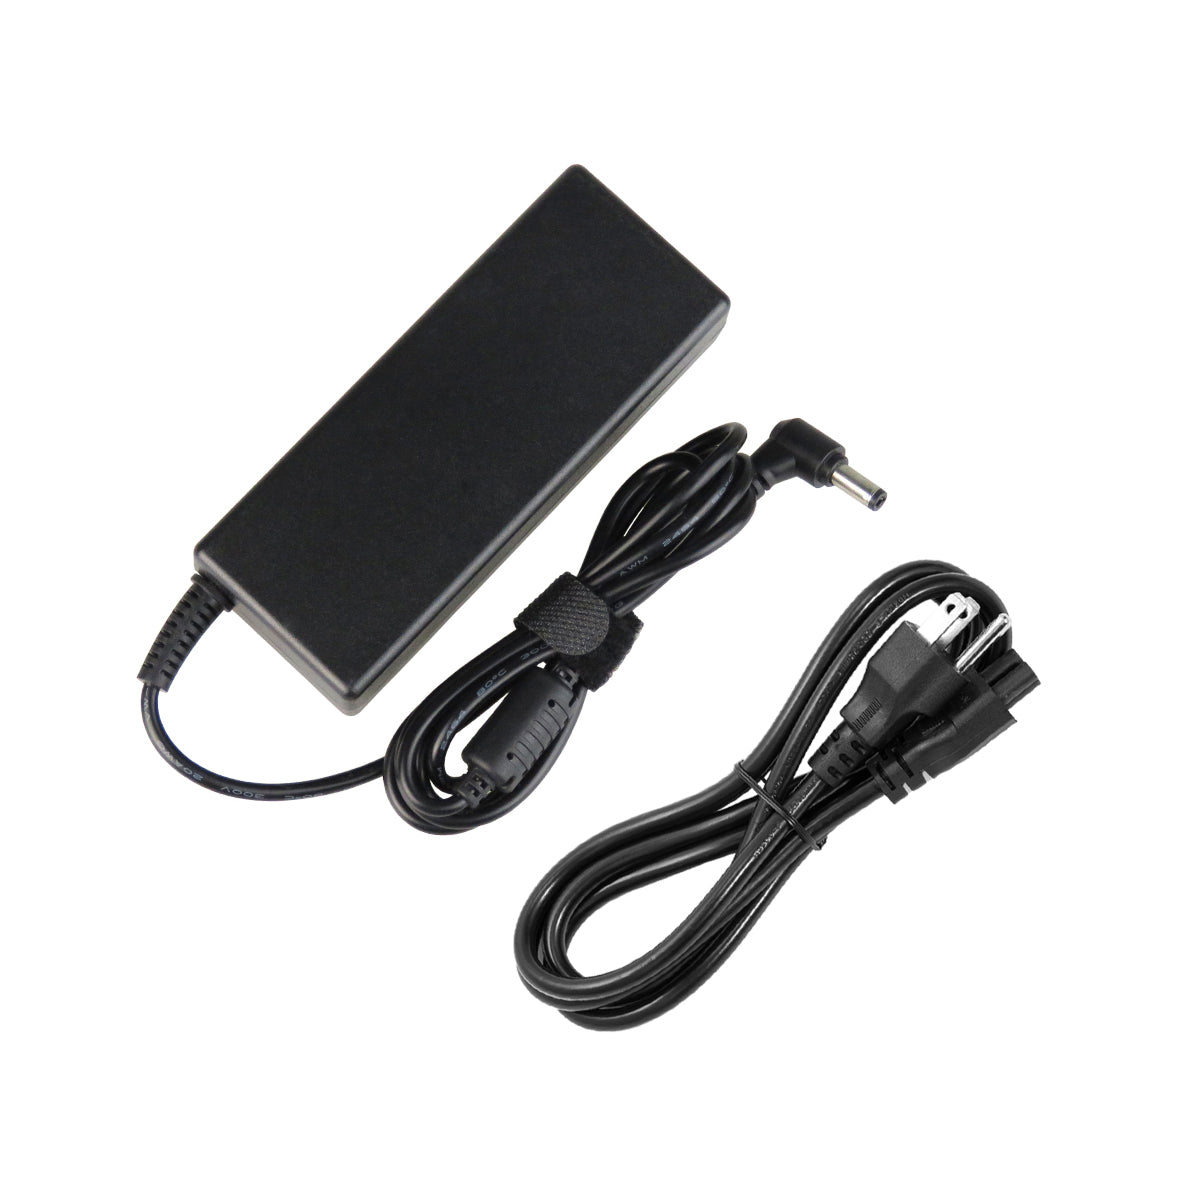 AC Adapter Charger for ASUS X71Vn Notebook.